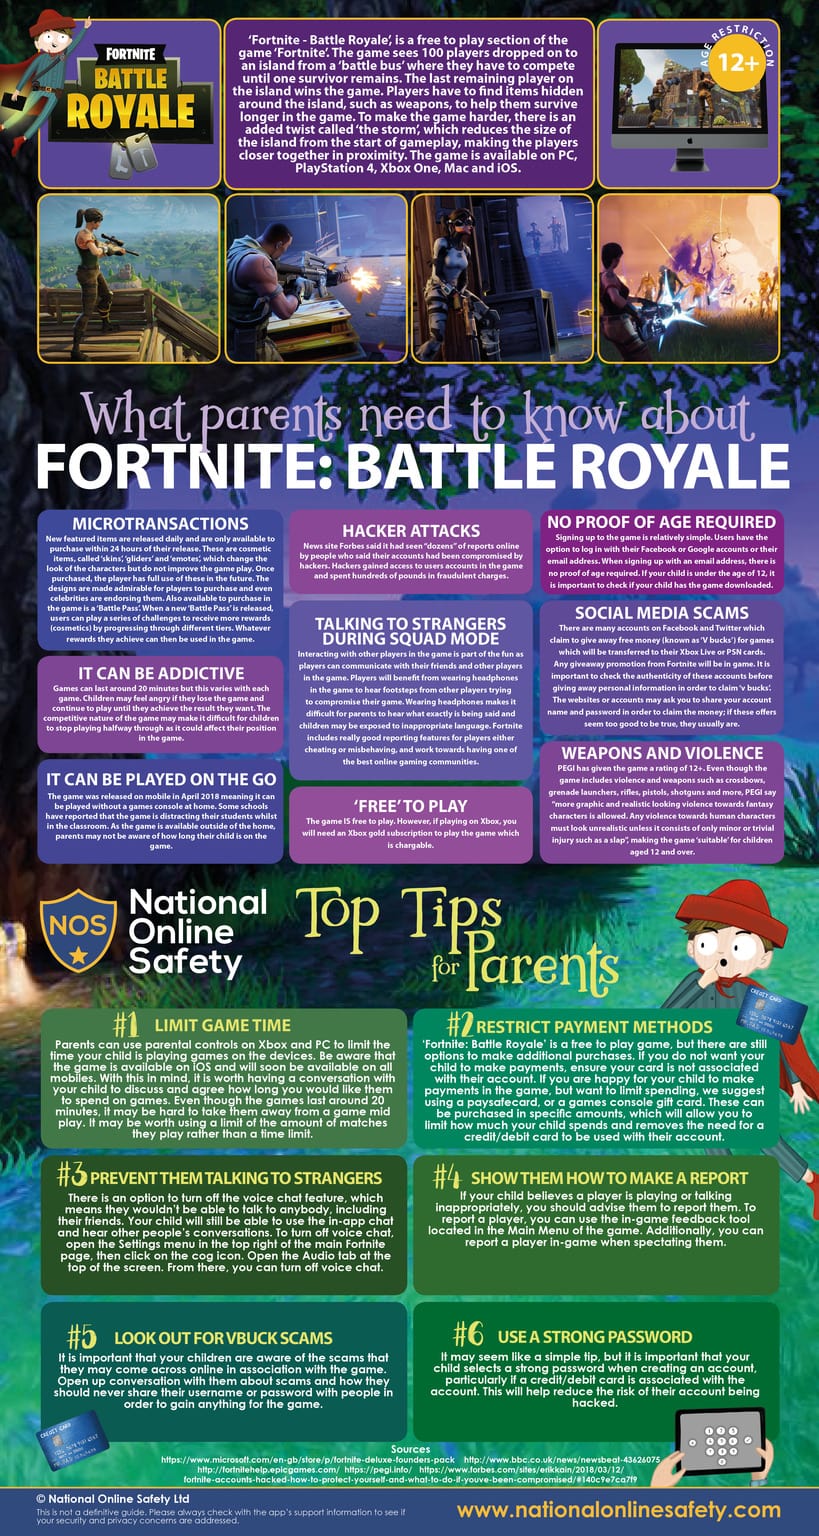 6 top tips for parents - xbox fortnite tips